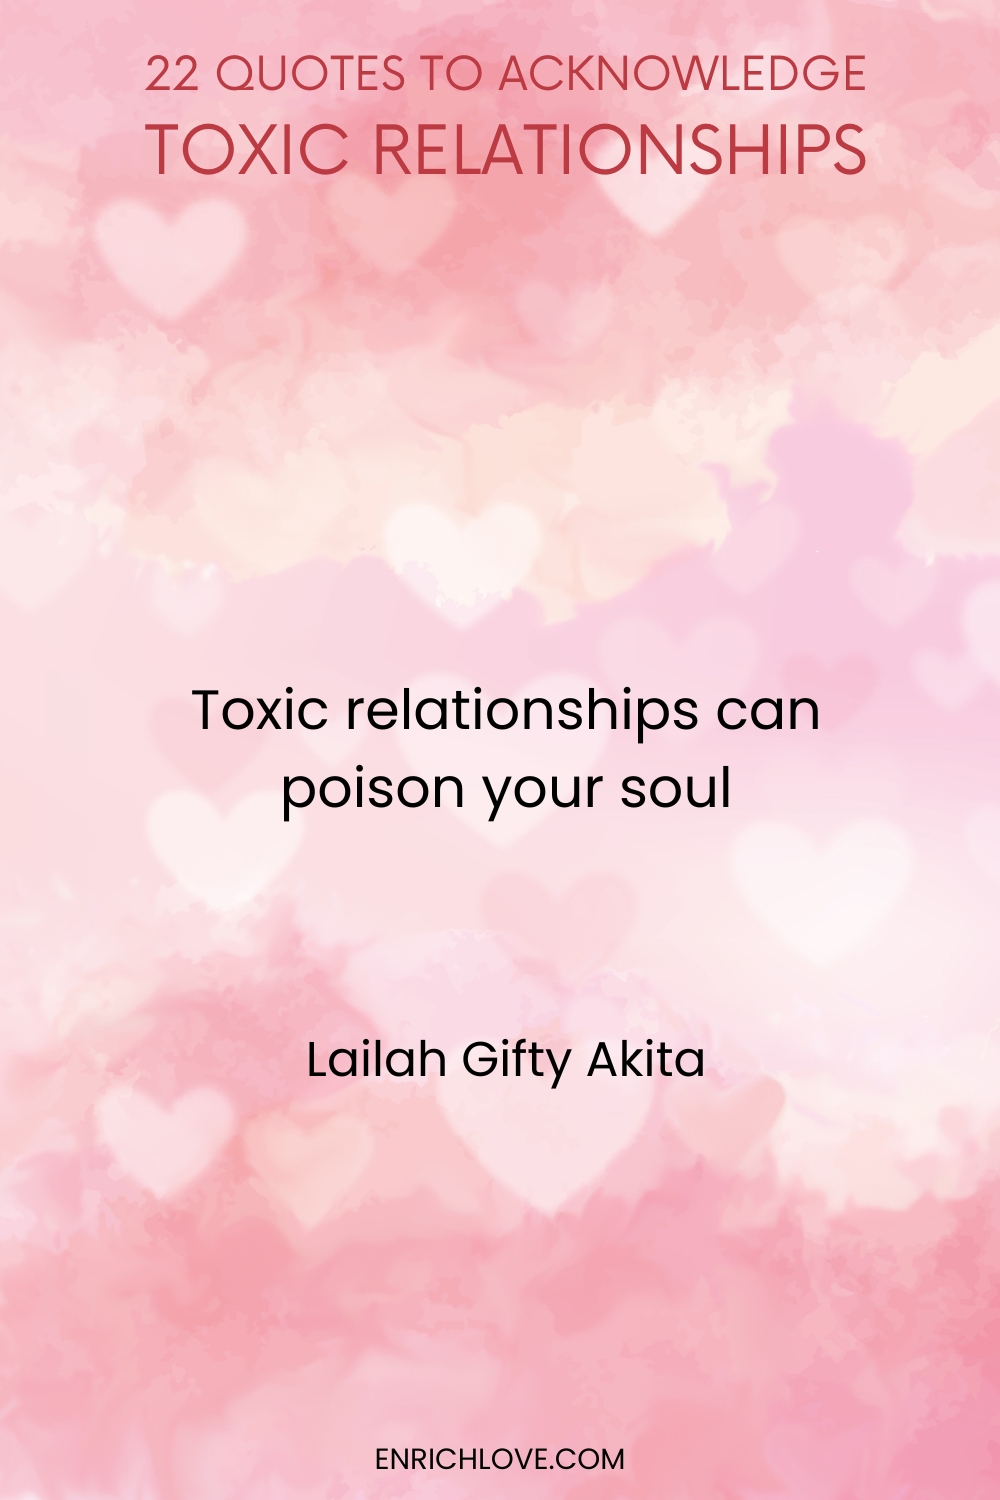 22 Quotes to Acknowledge Toxic Relationships -Toxic relationships can poison your soul by Lailah Gifty Akita